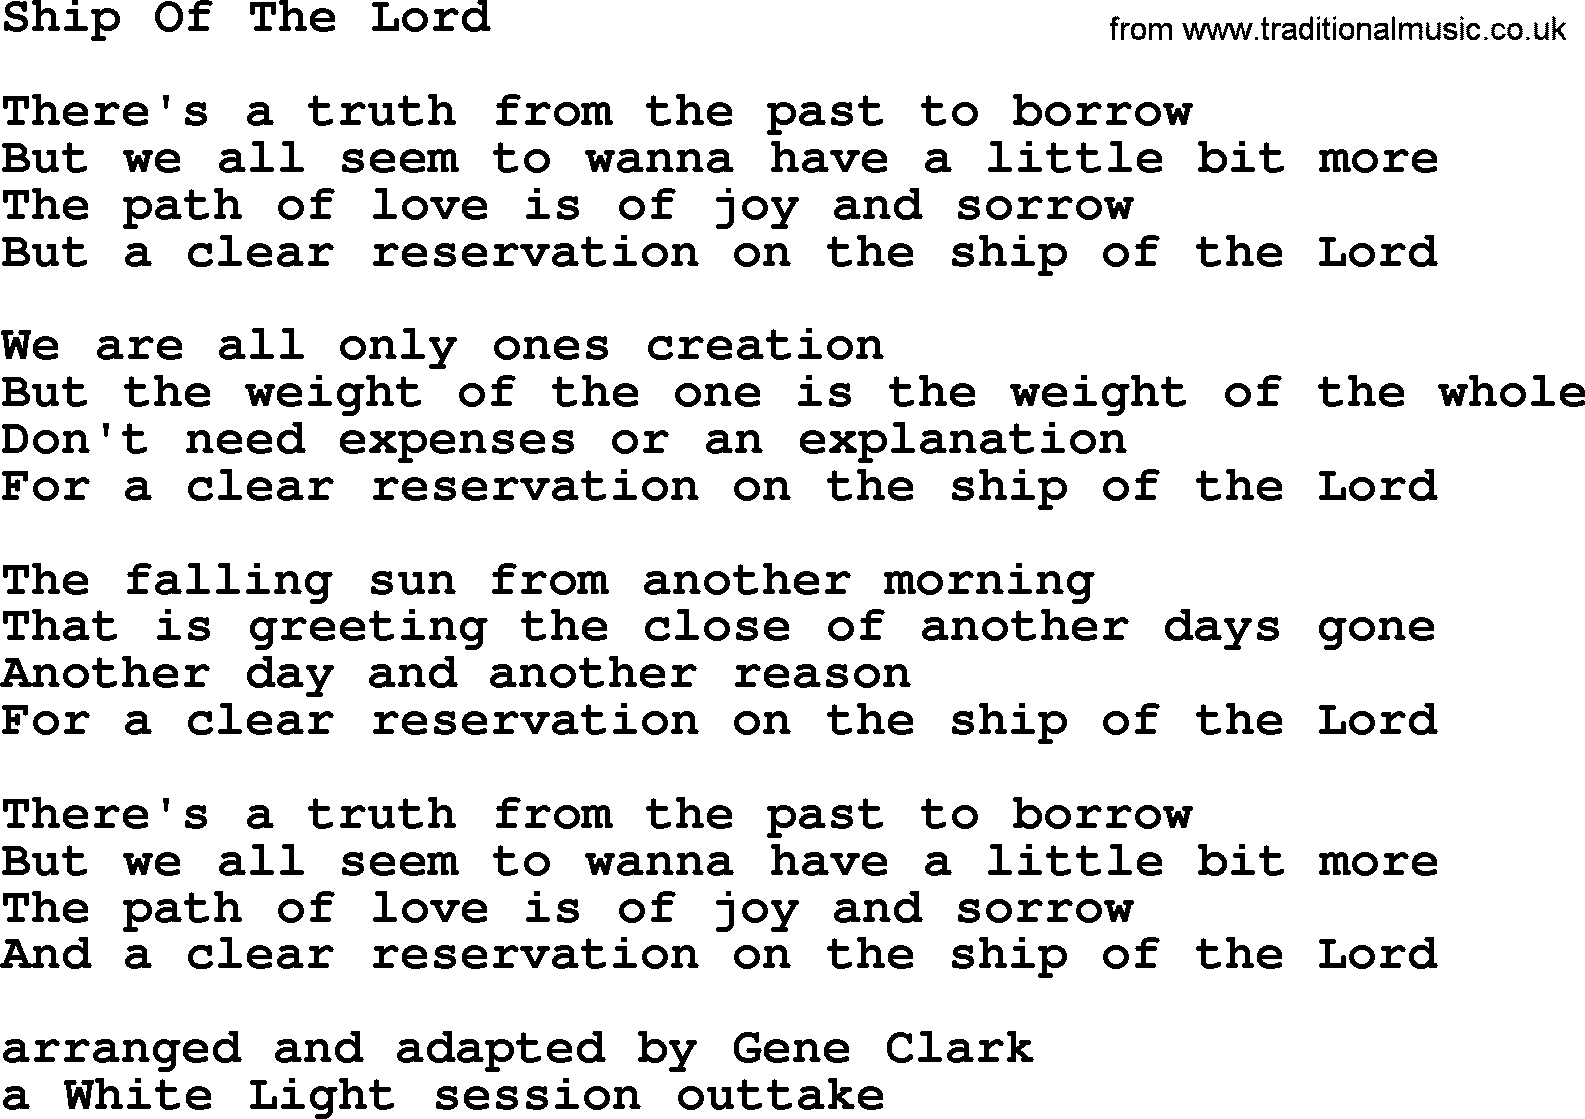 The Byrds song Ship Of The Lord, lyrics